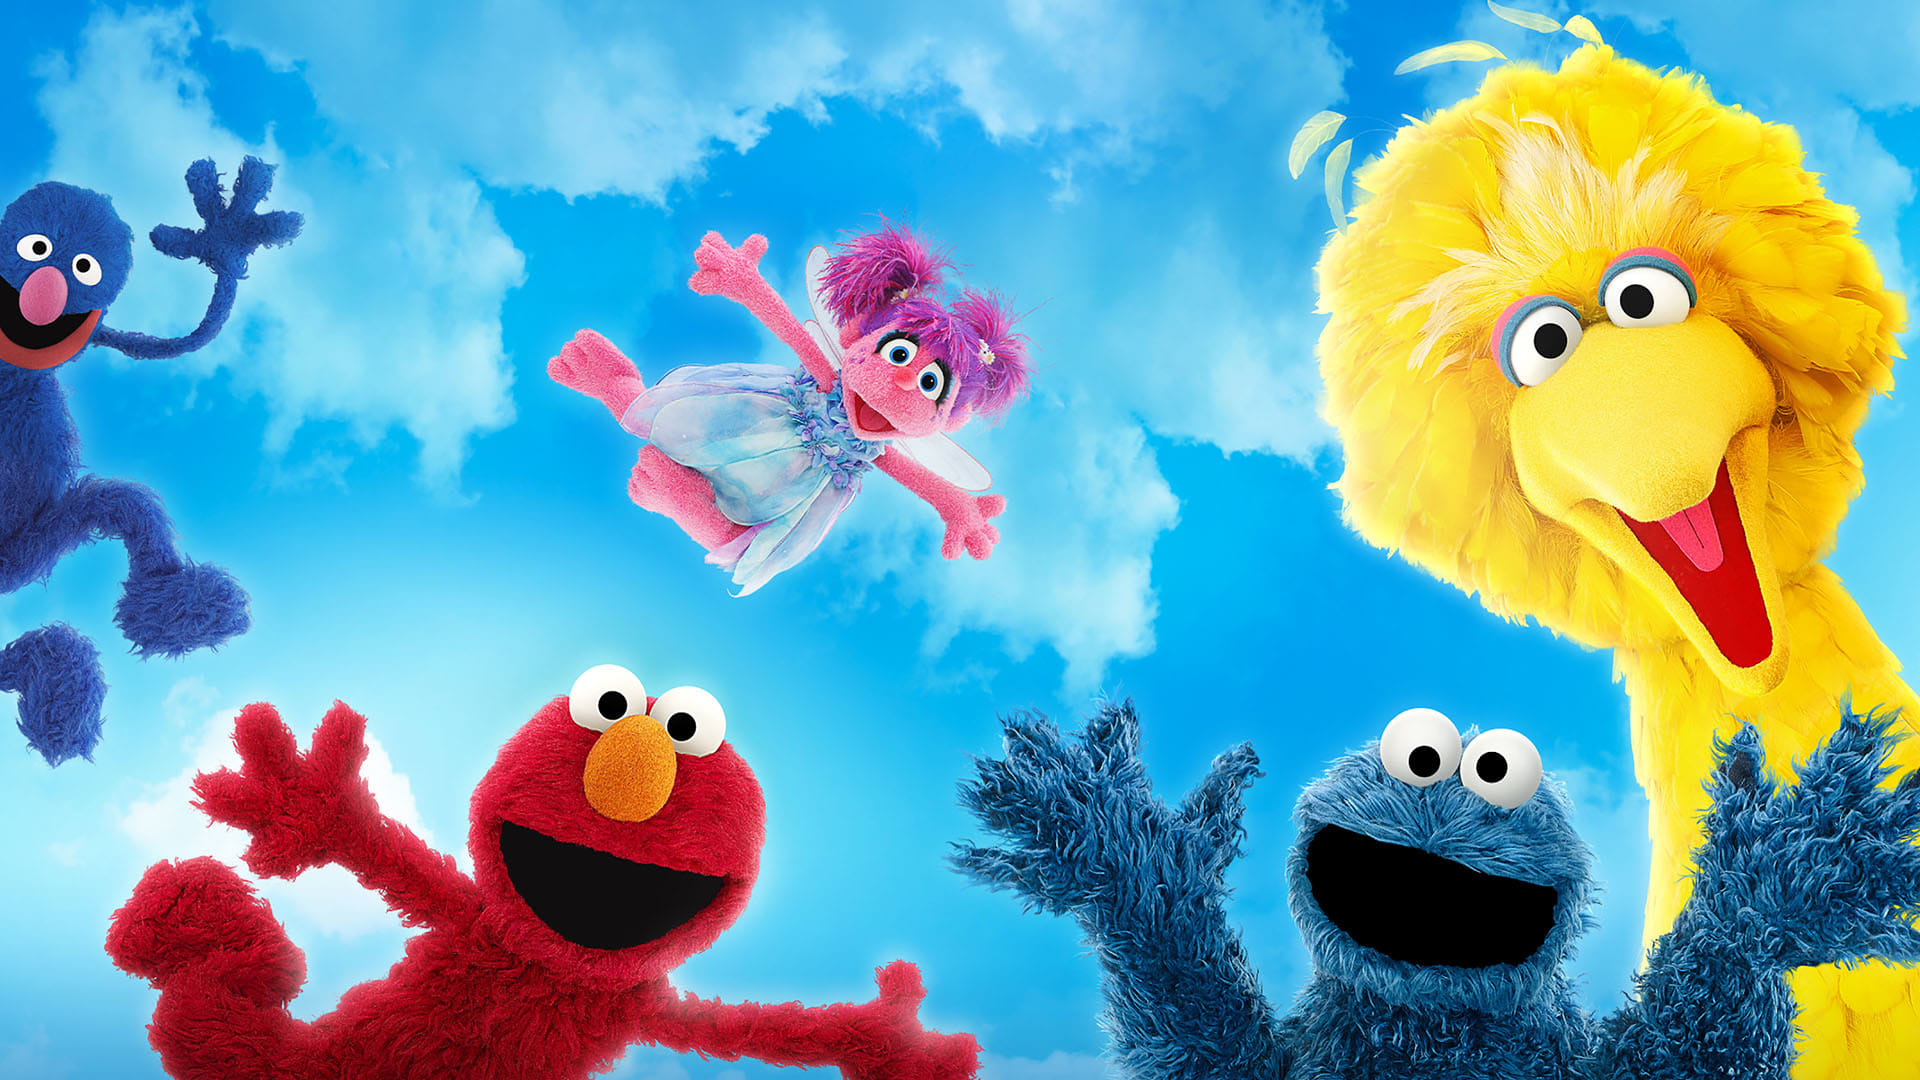 Sesame Street: Educational children's television series, Live-action, Sketch comedy, Animation and puppetry. 1920x1080 Full HD Wallpaper.